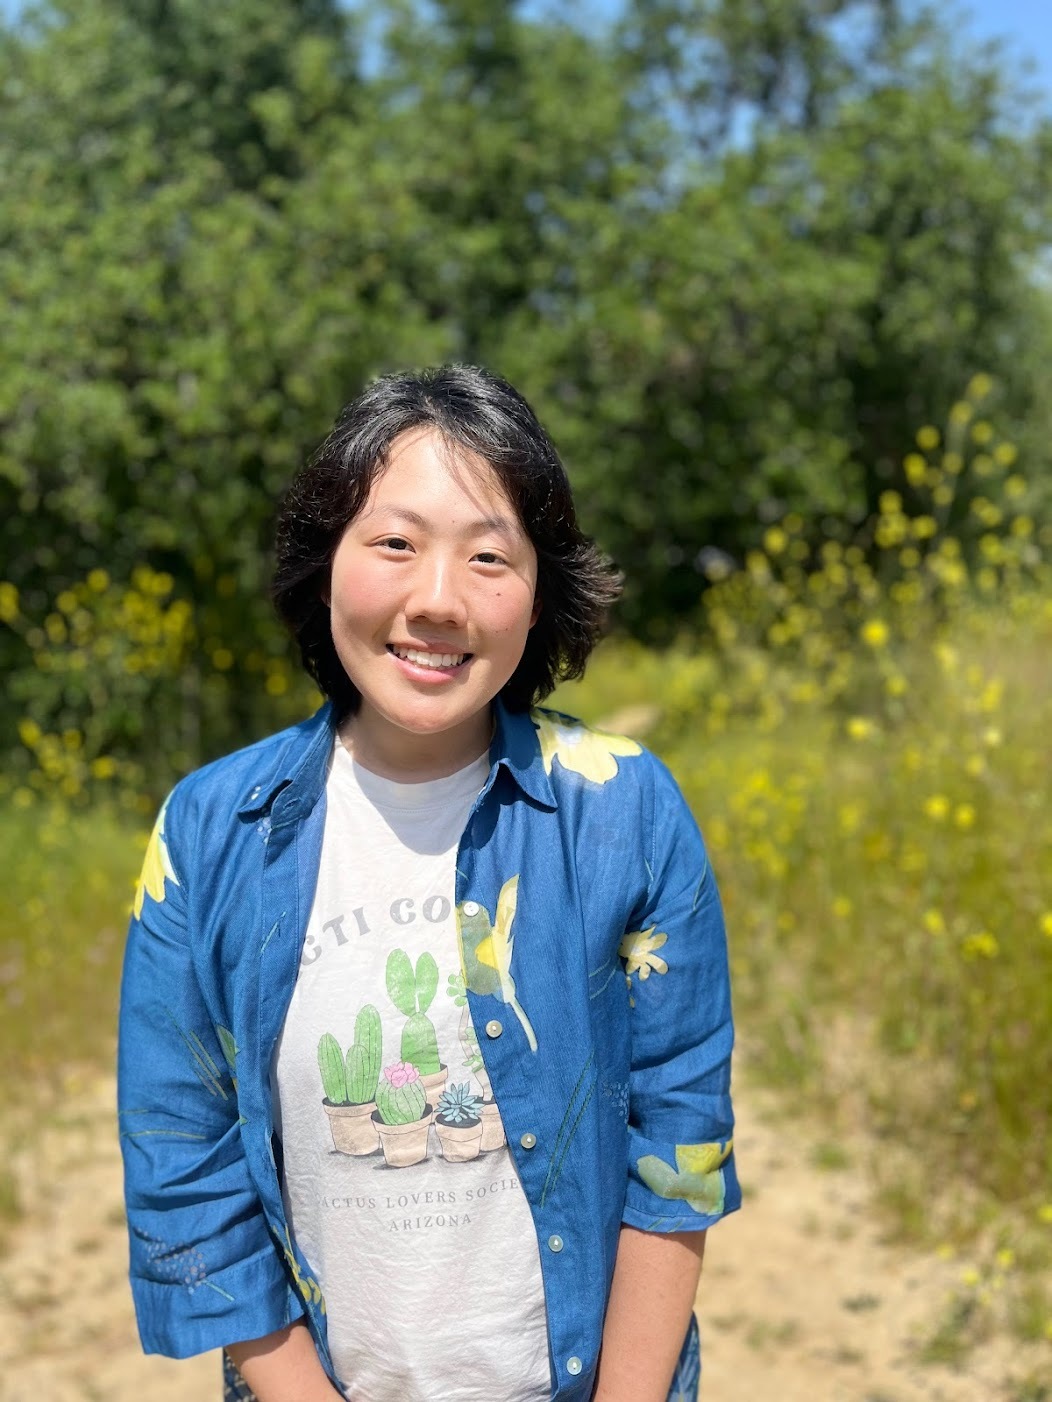 headshot of asian person in a field, they are smiling